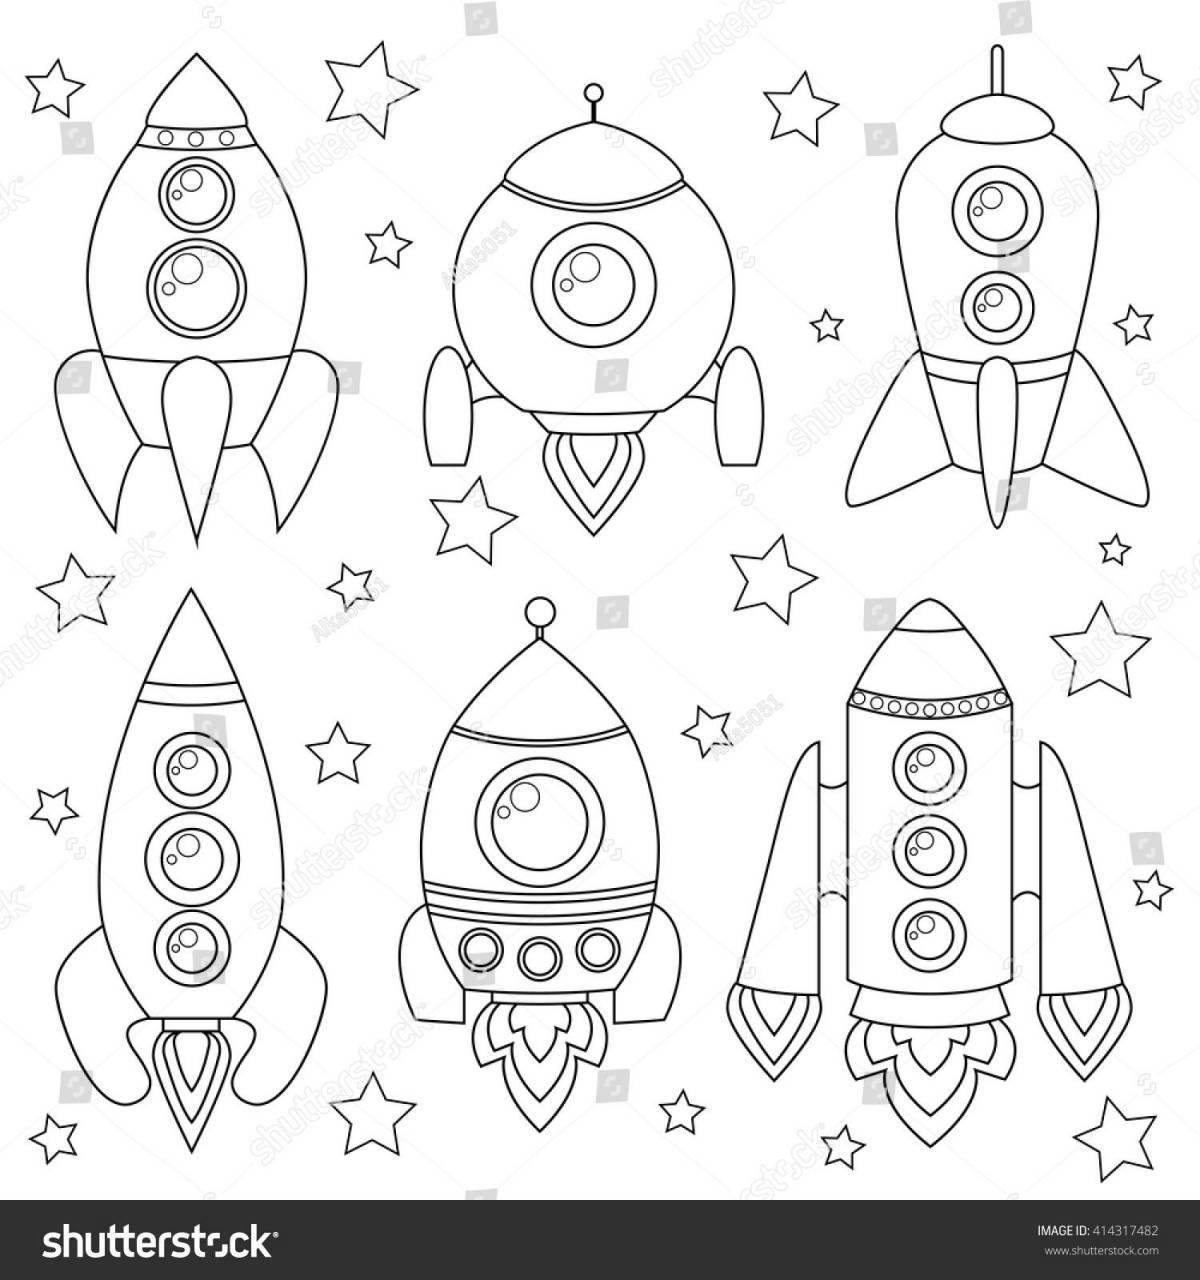 Amazing rocket coloring book for 6-7 year olds